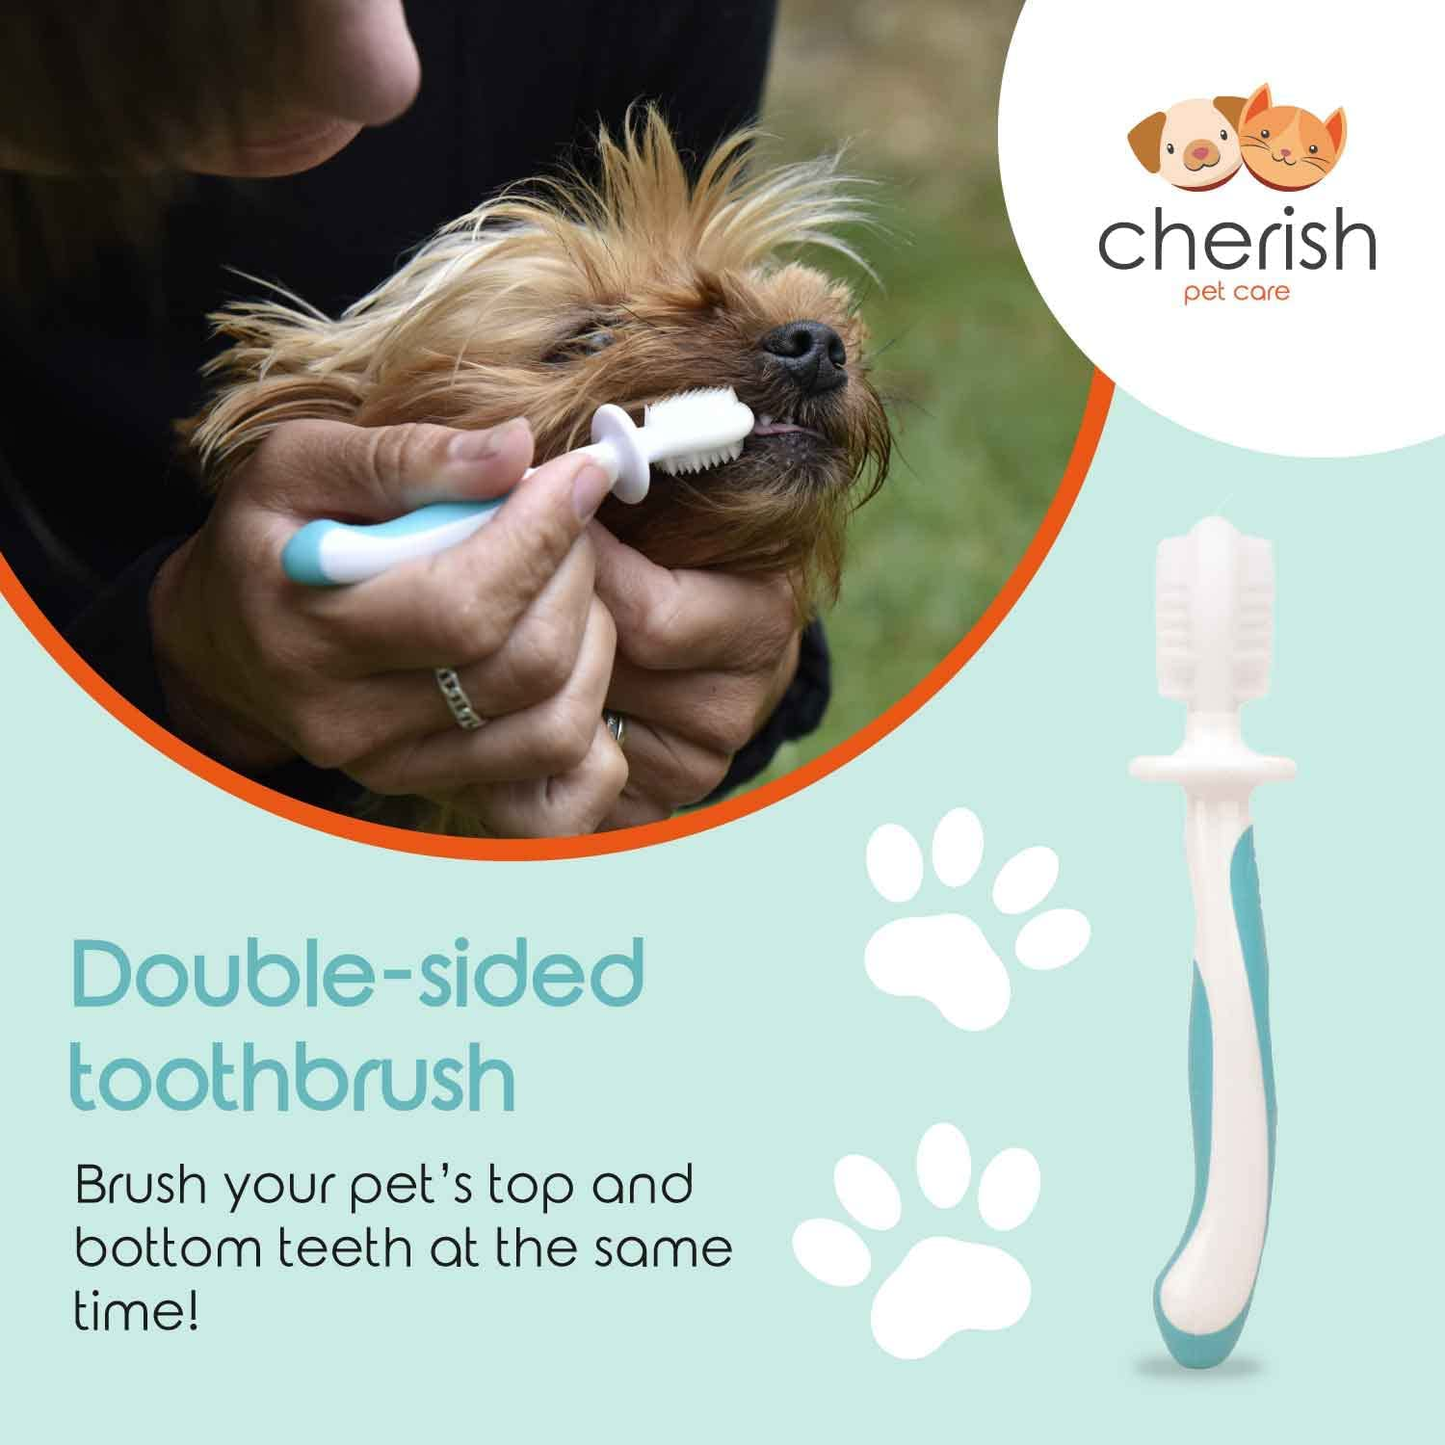 3 Piece Dog Toothbrush Kit - Dog Finger Toothbrush, Double-Sided Toothbrush, and Small Doggie Toothbrush - Freshen Breath & Remove Plaque Build-Up with This Cat Toothbrush and Puppy Toothbrush Set